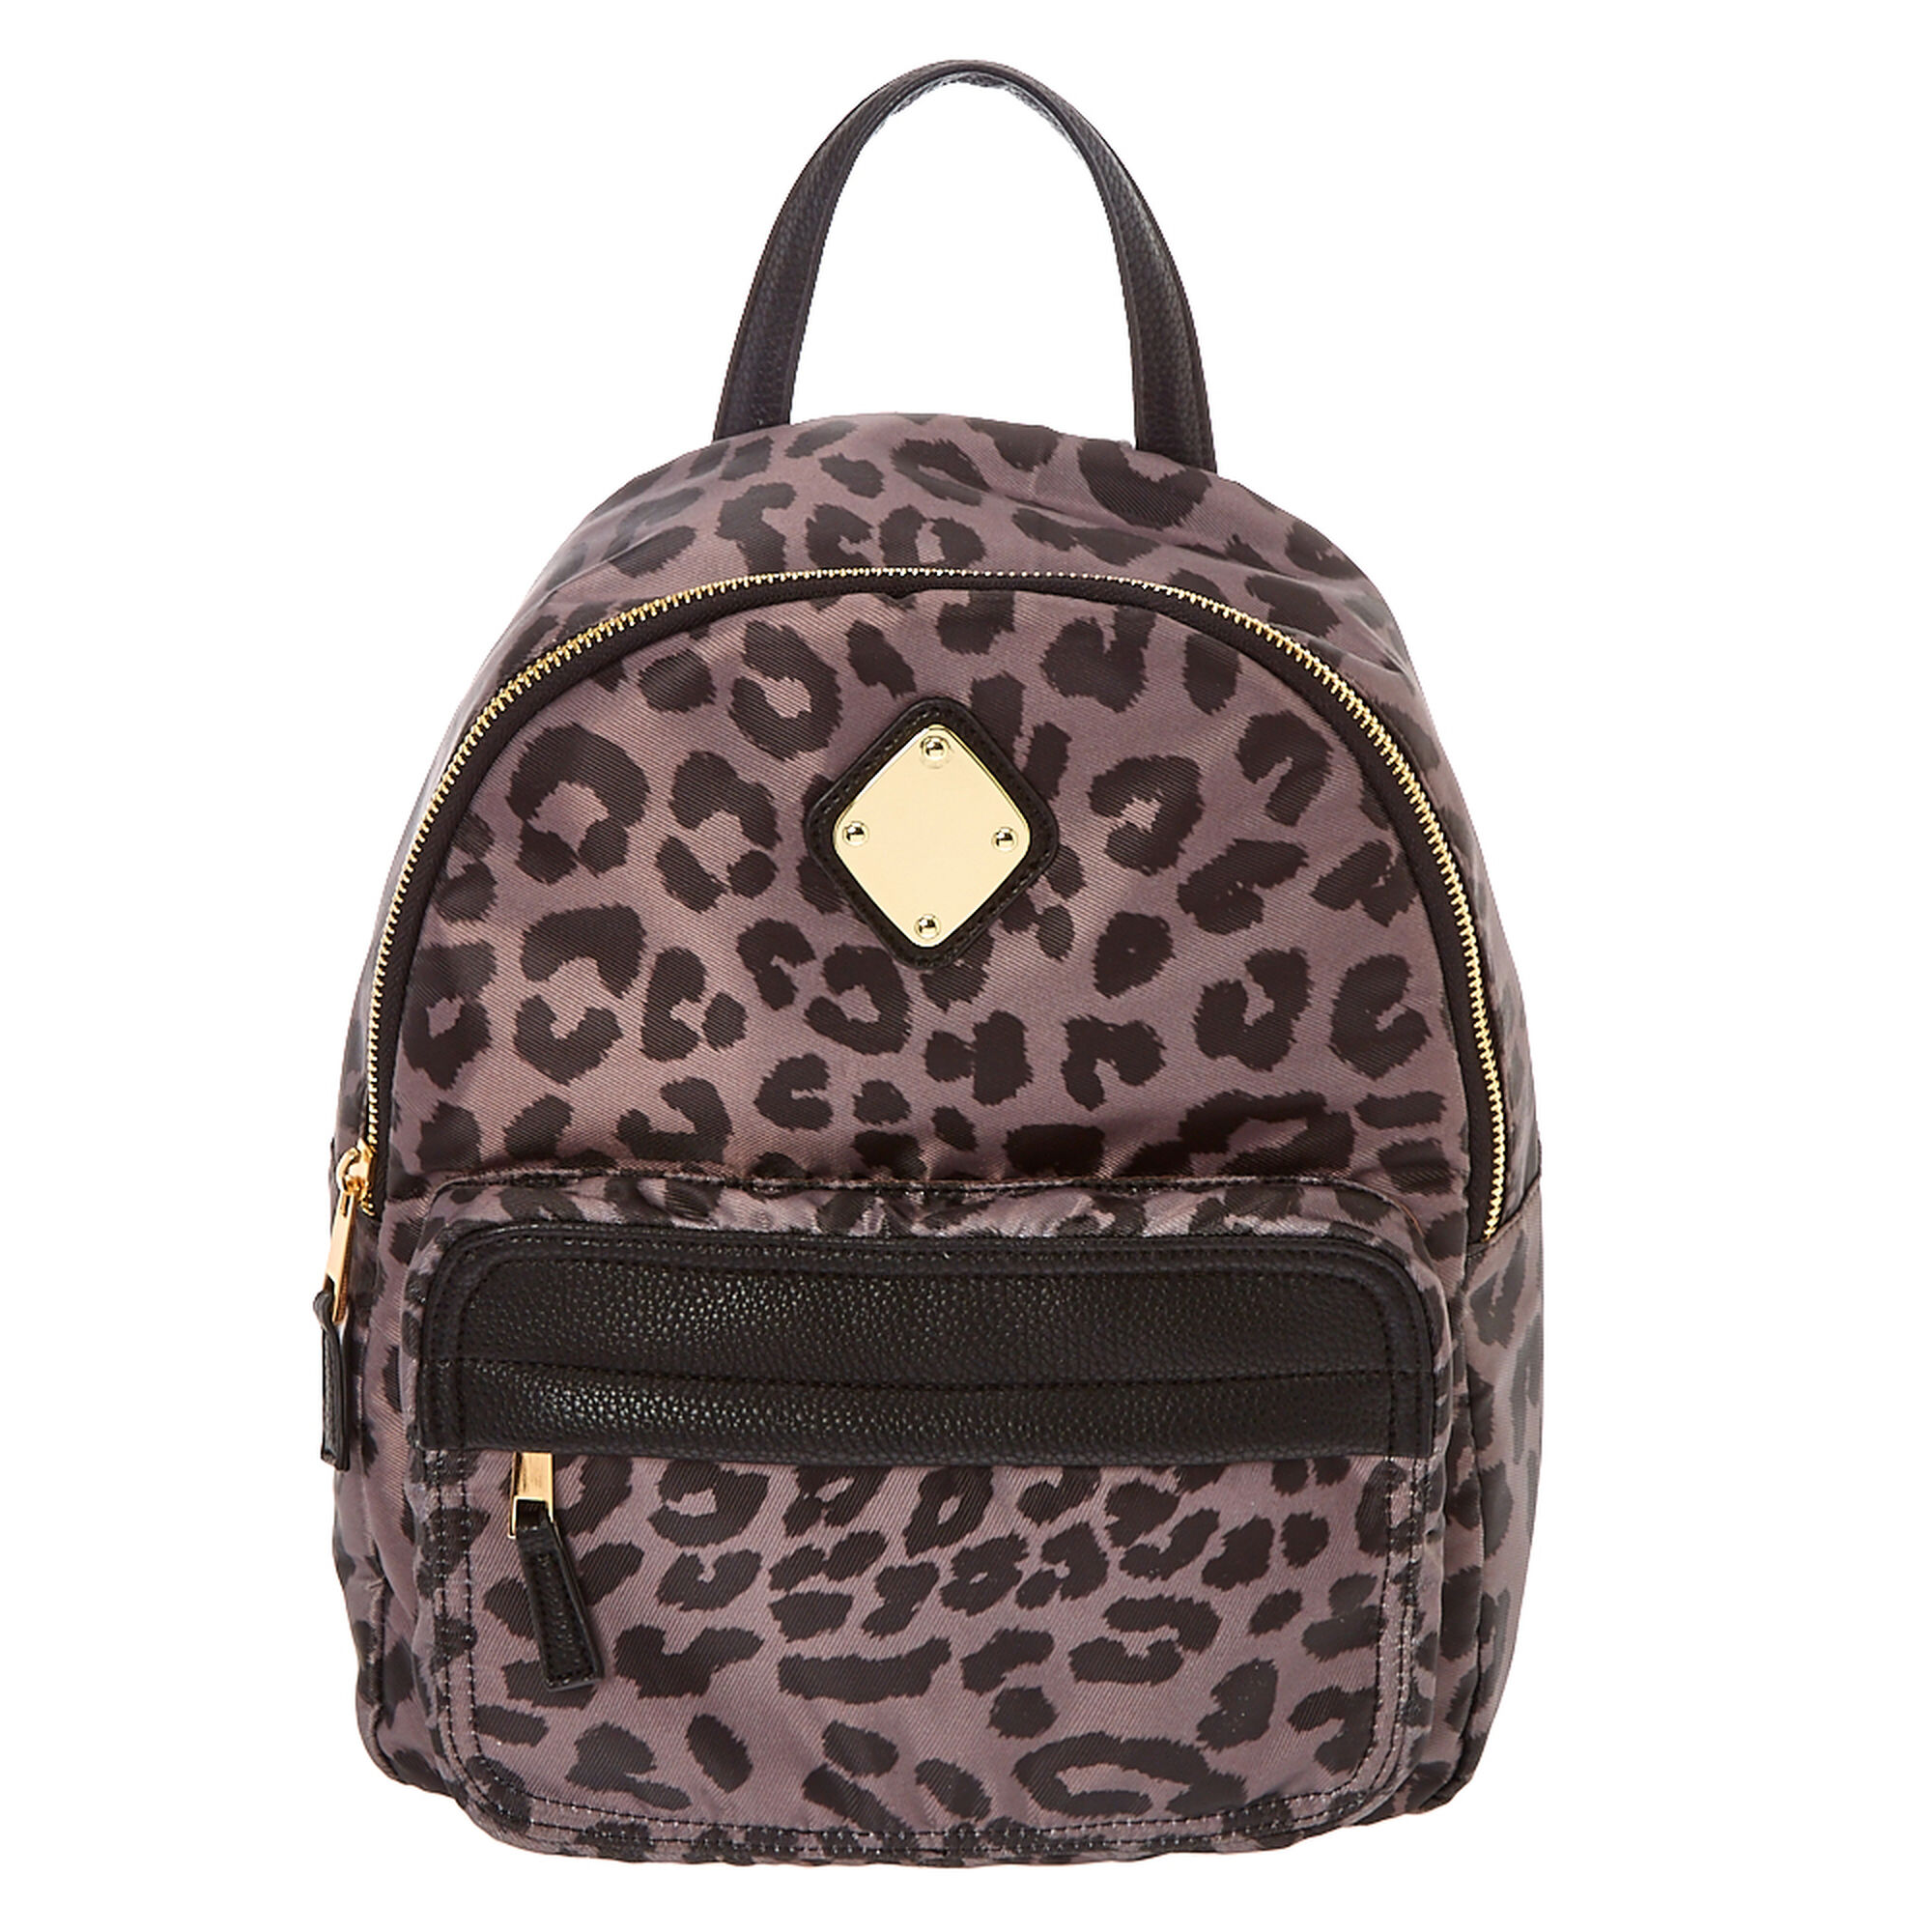 Gray Leopard Print Satin Backpack | Icing US